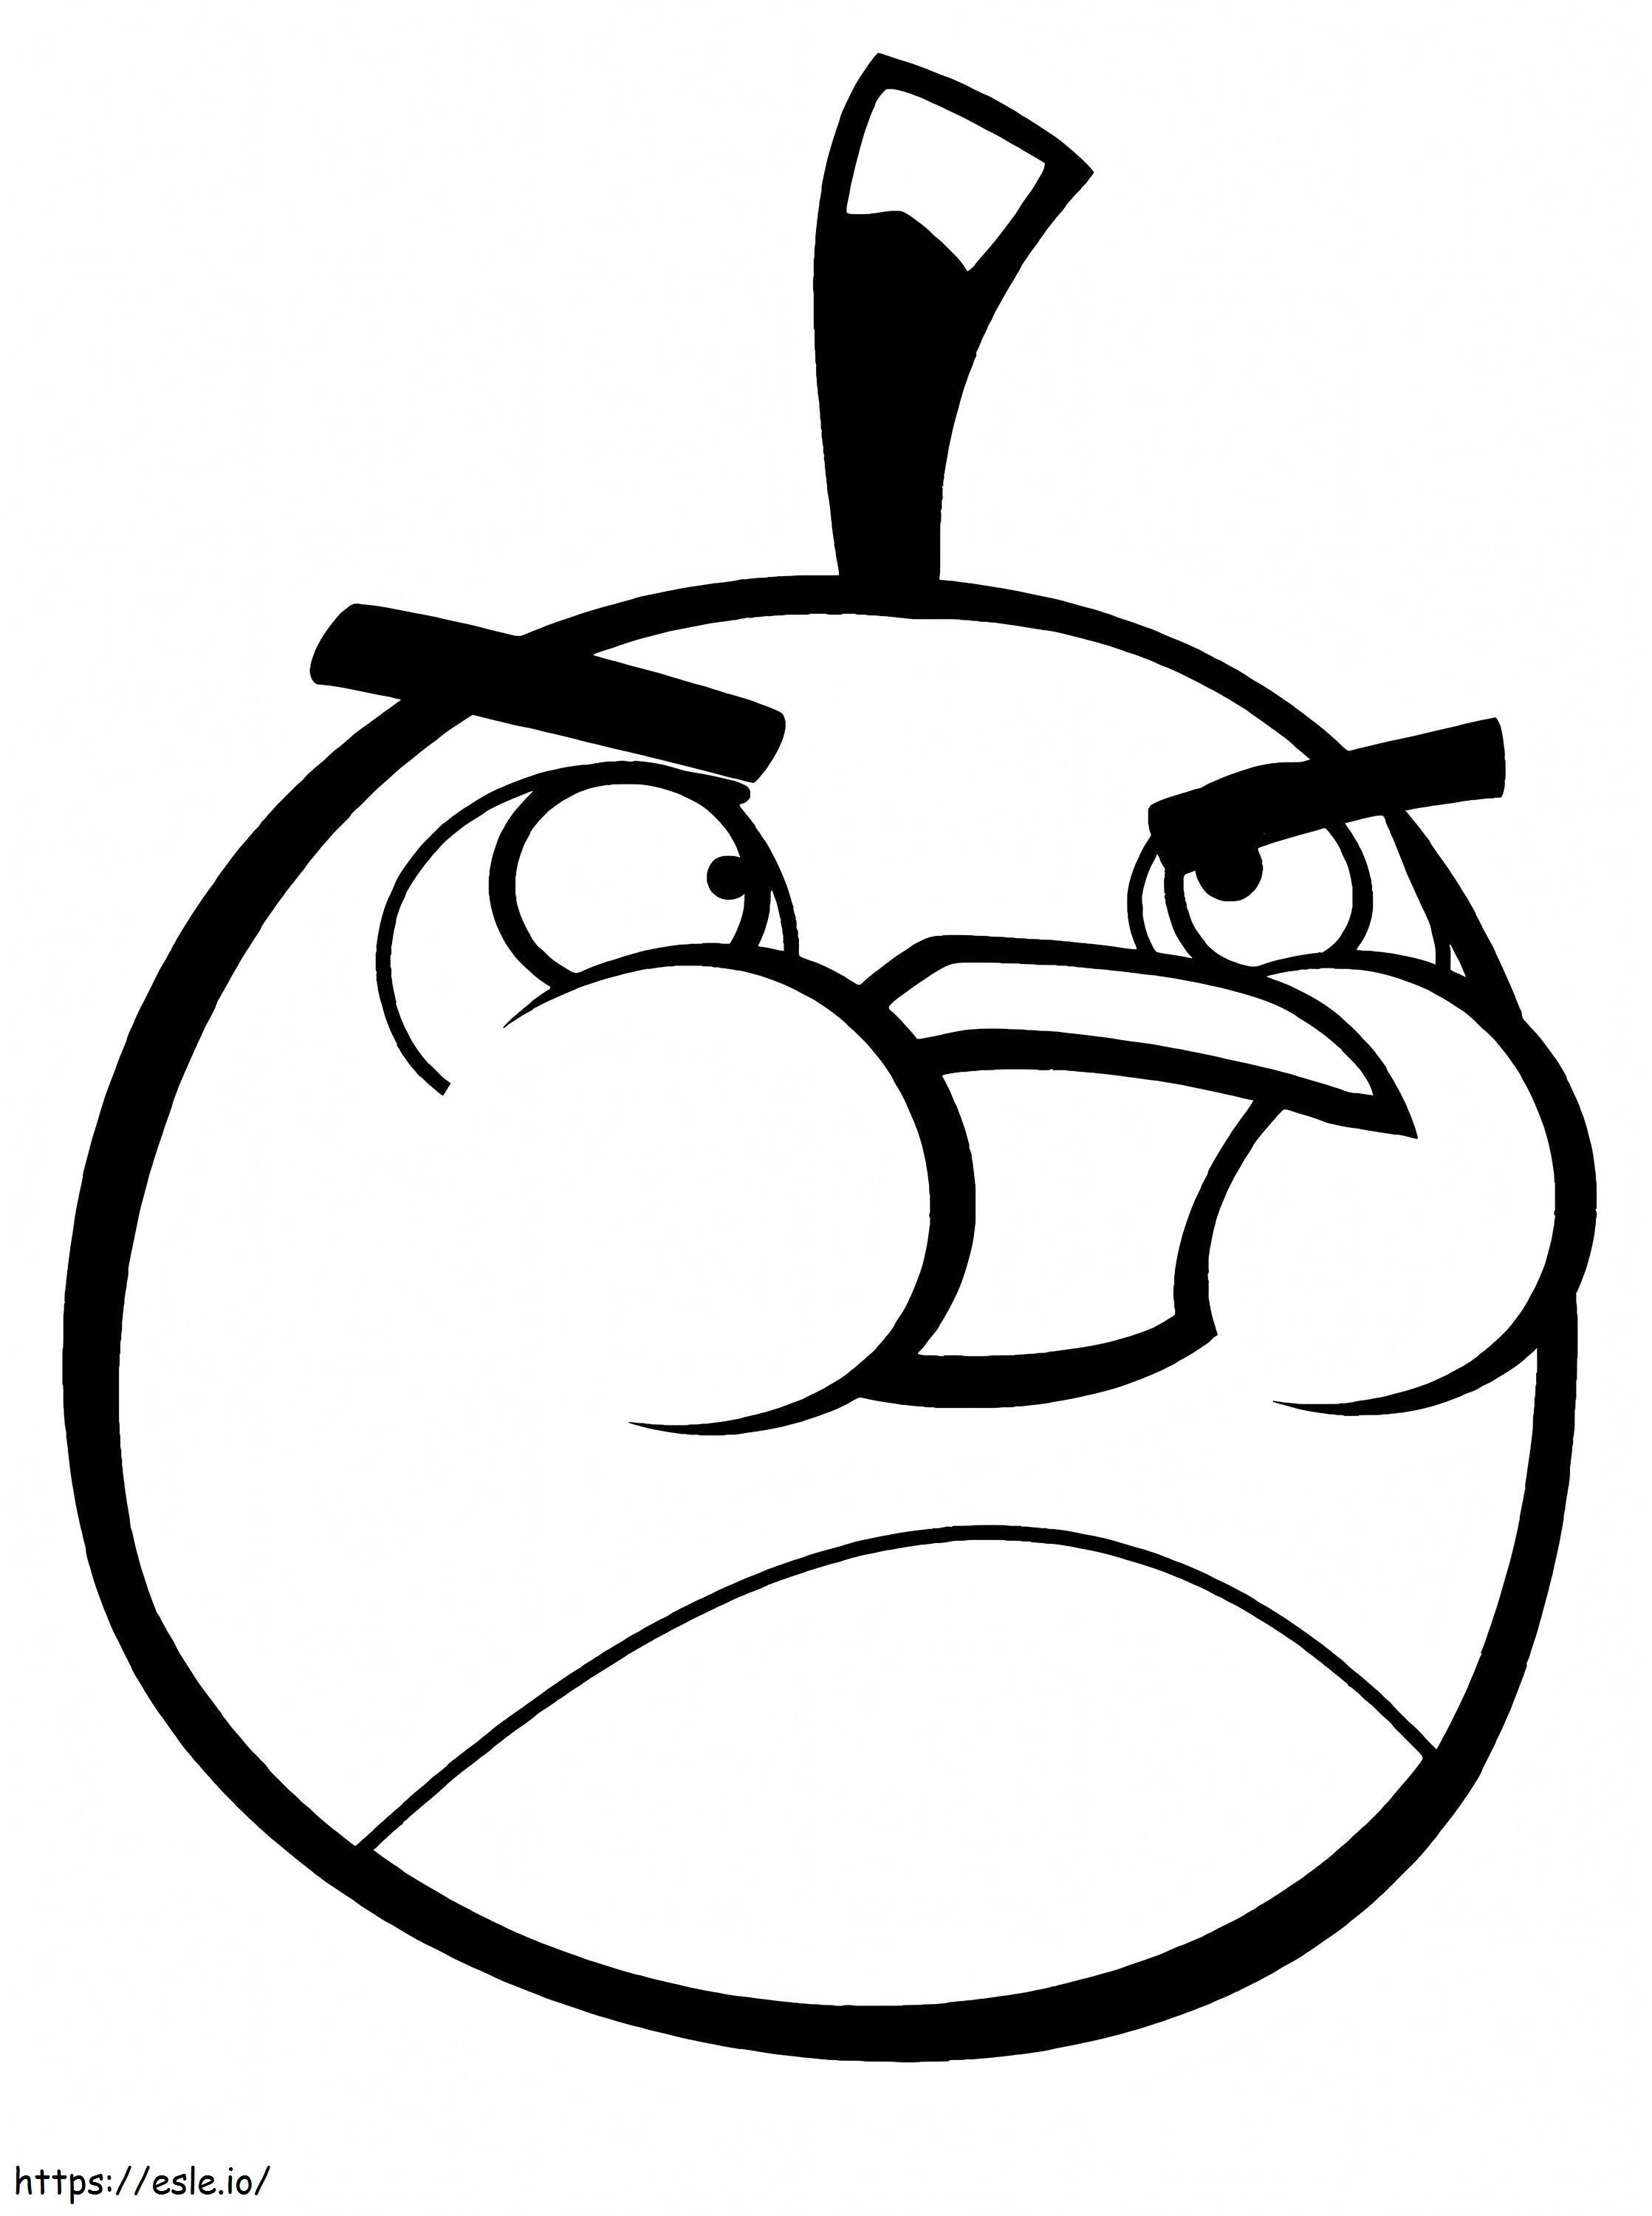 1554109371 Game Coloring Angry Bird Save Bomb The Black Bird Of Game Coloring Angry Bird coloring page